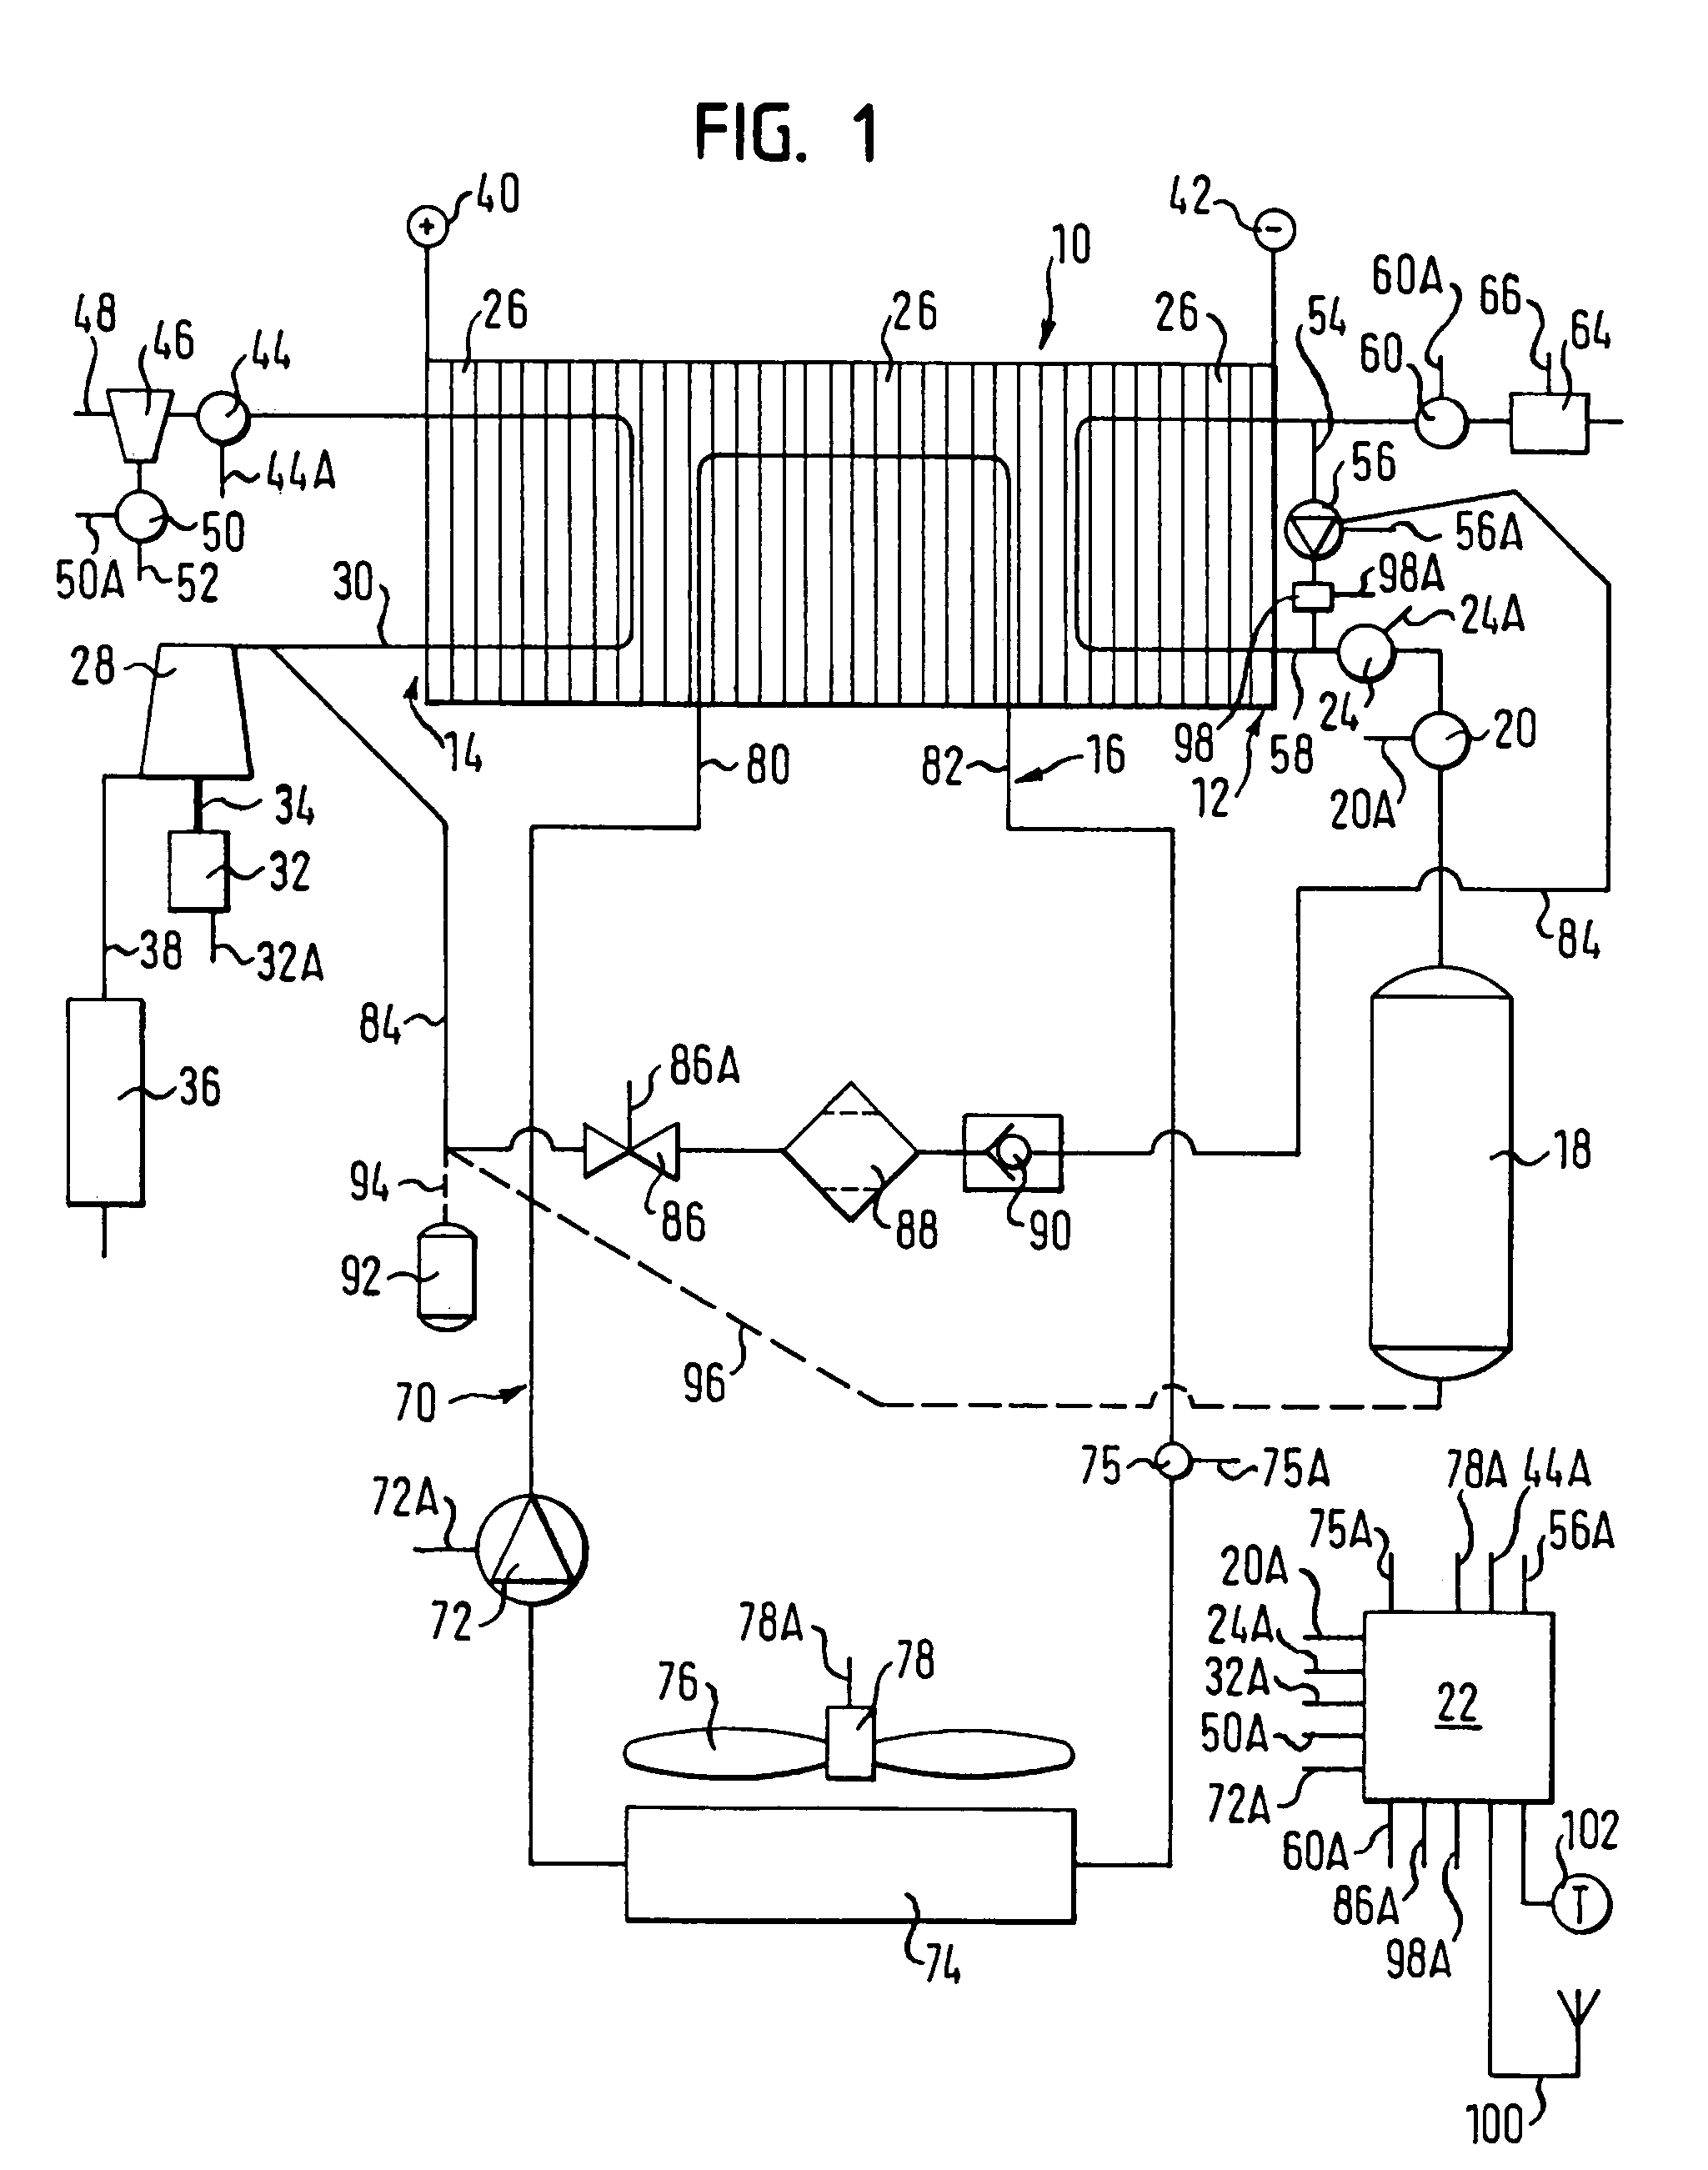 Operation method and purging system for a hydrogen demand/delivery unit in a fuel cell system